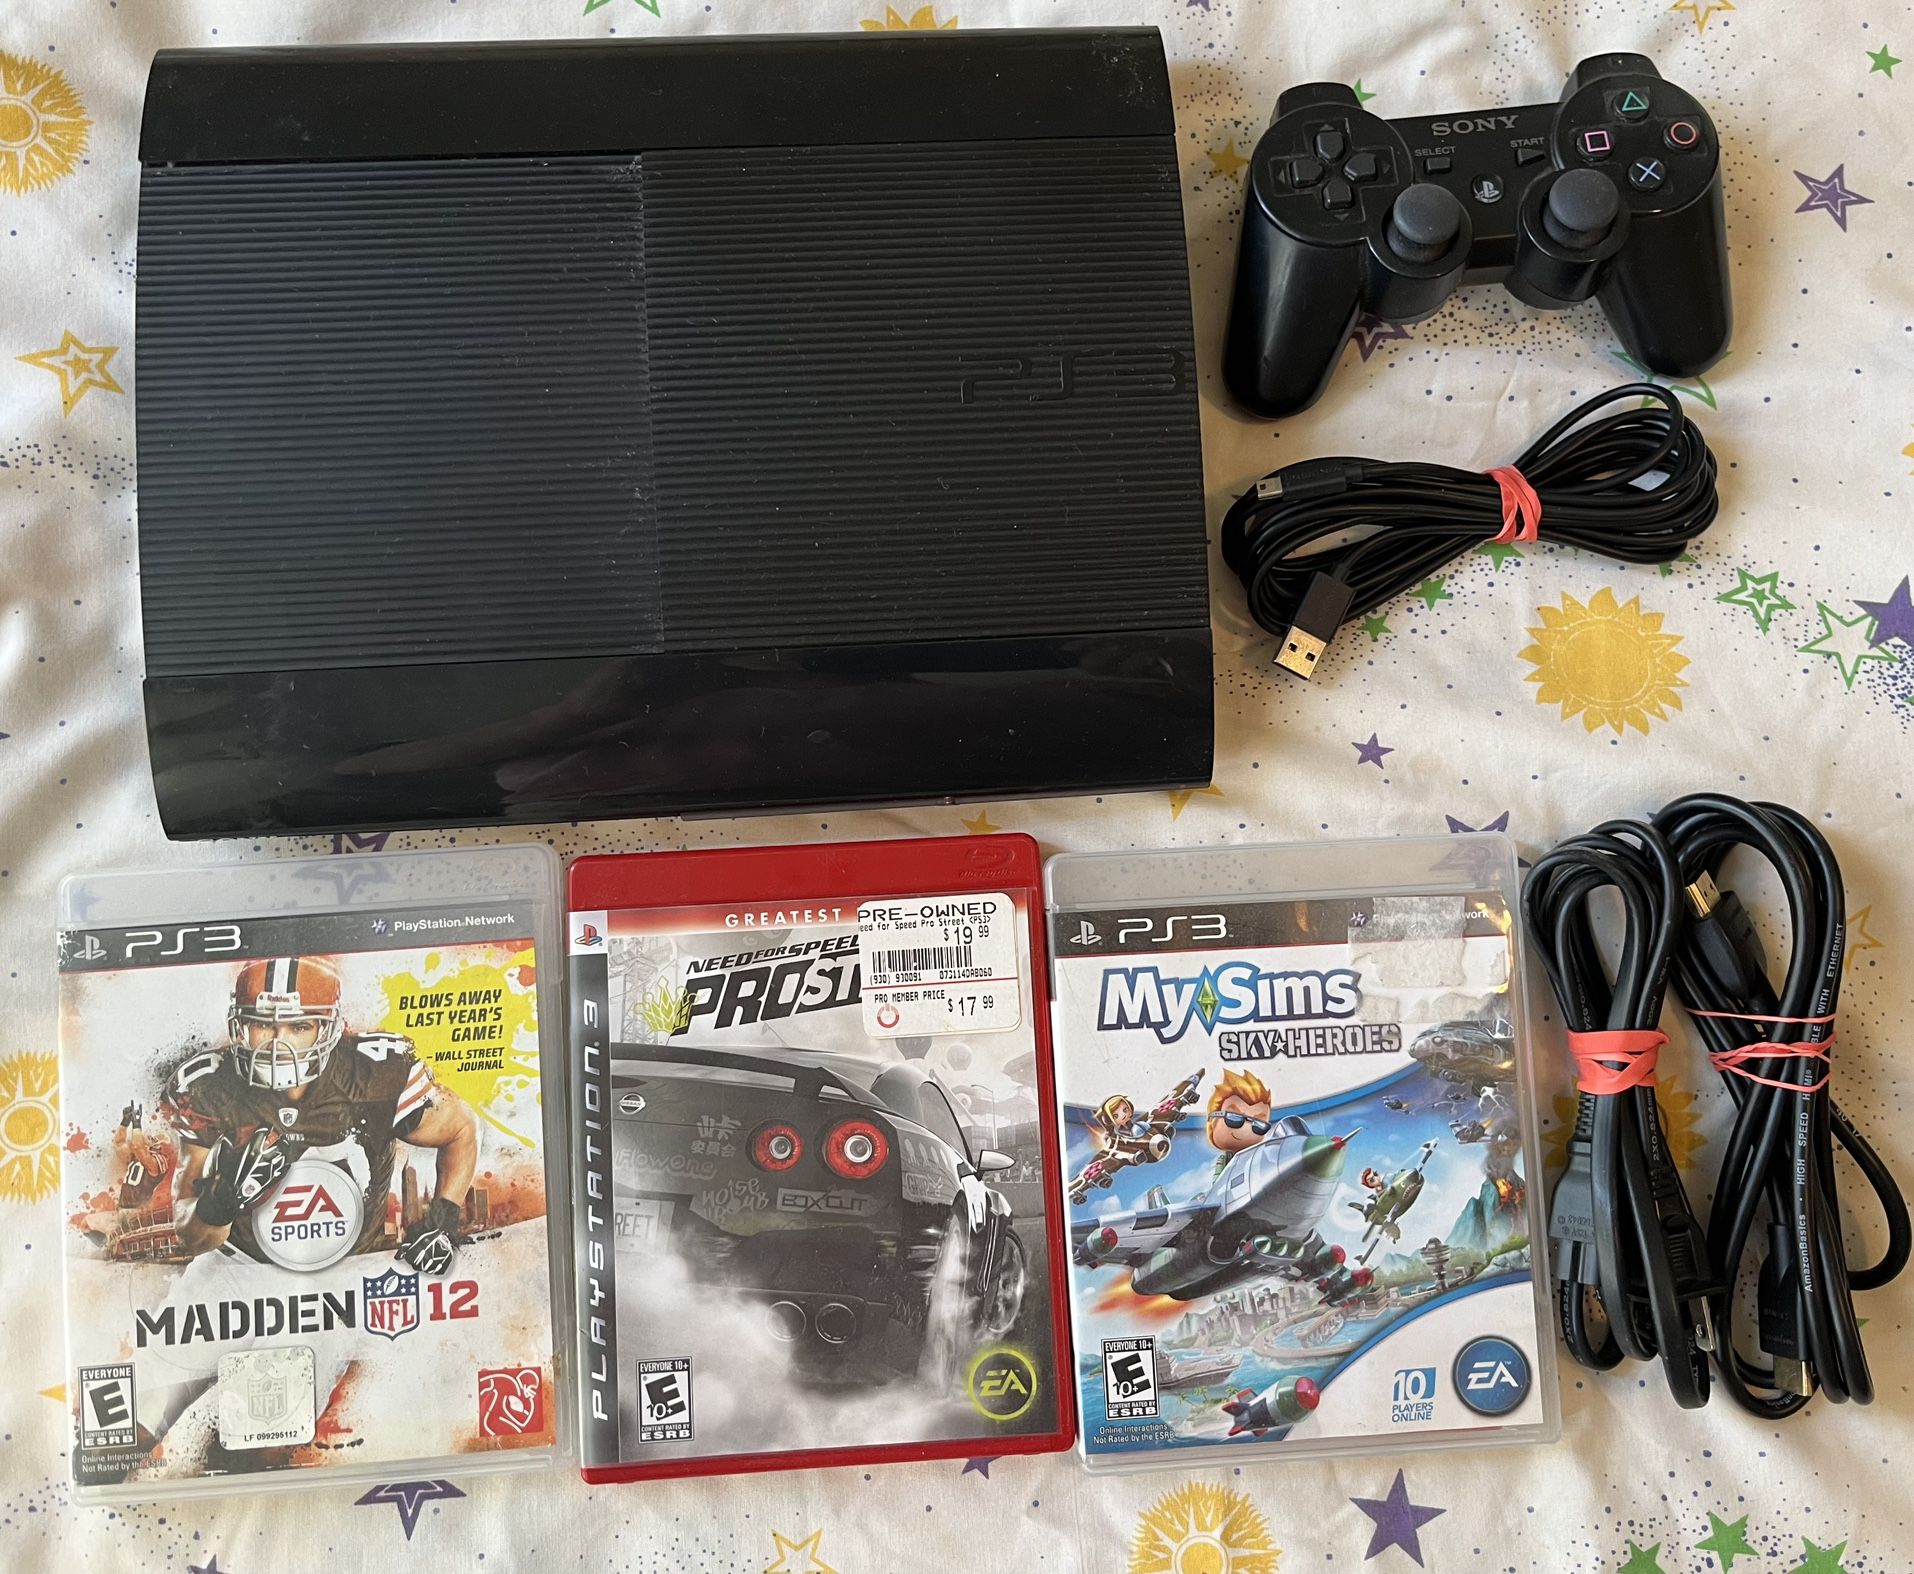 PlayStation 3 System 250gb Complete & 3 Games